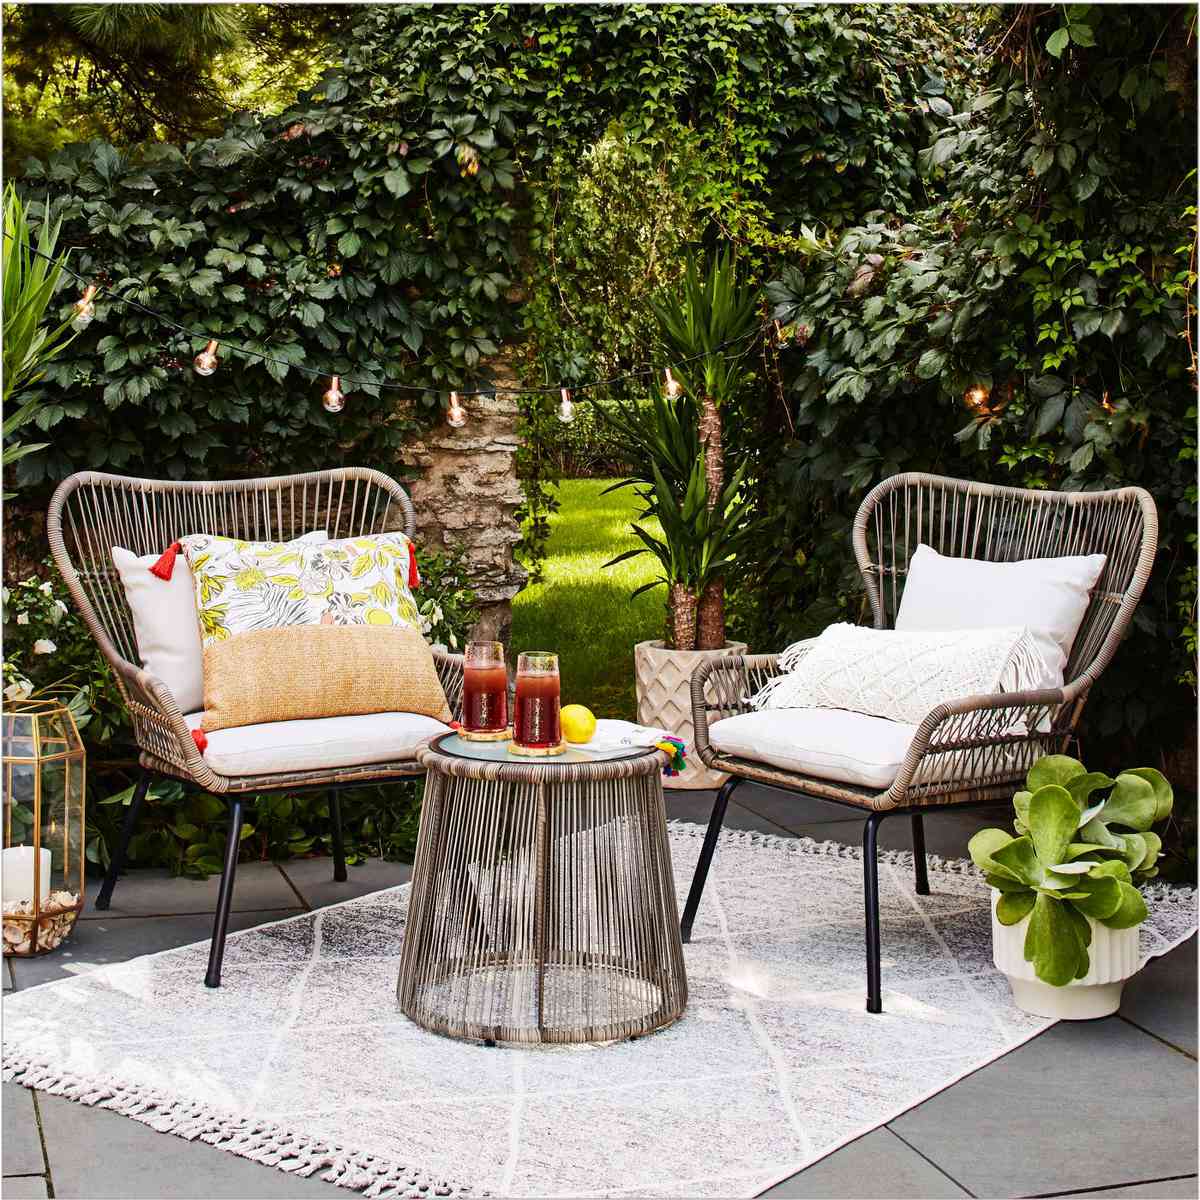 Best Outdoor Furniture For Small Spaces, What Is The Best Outdoor Chair